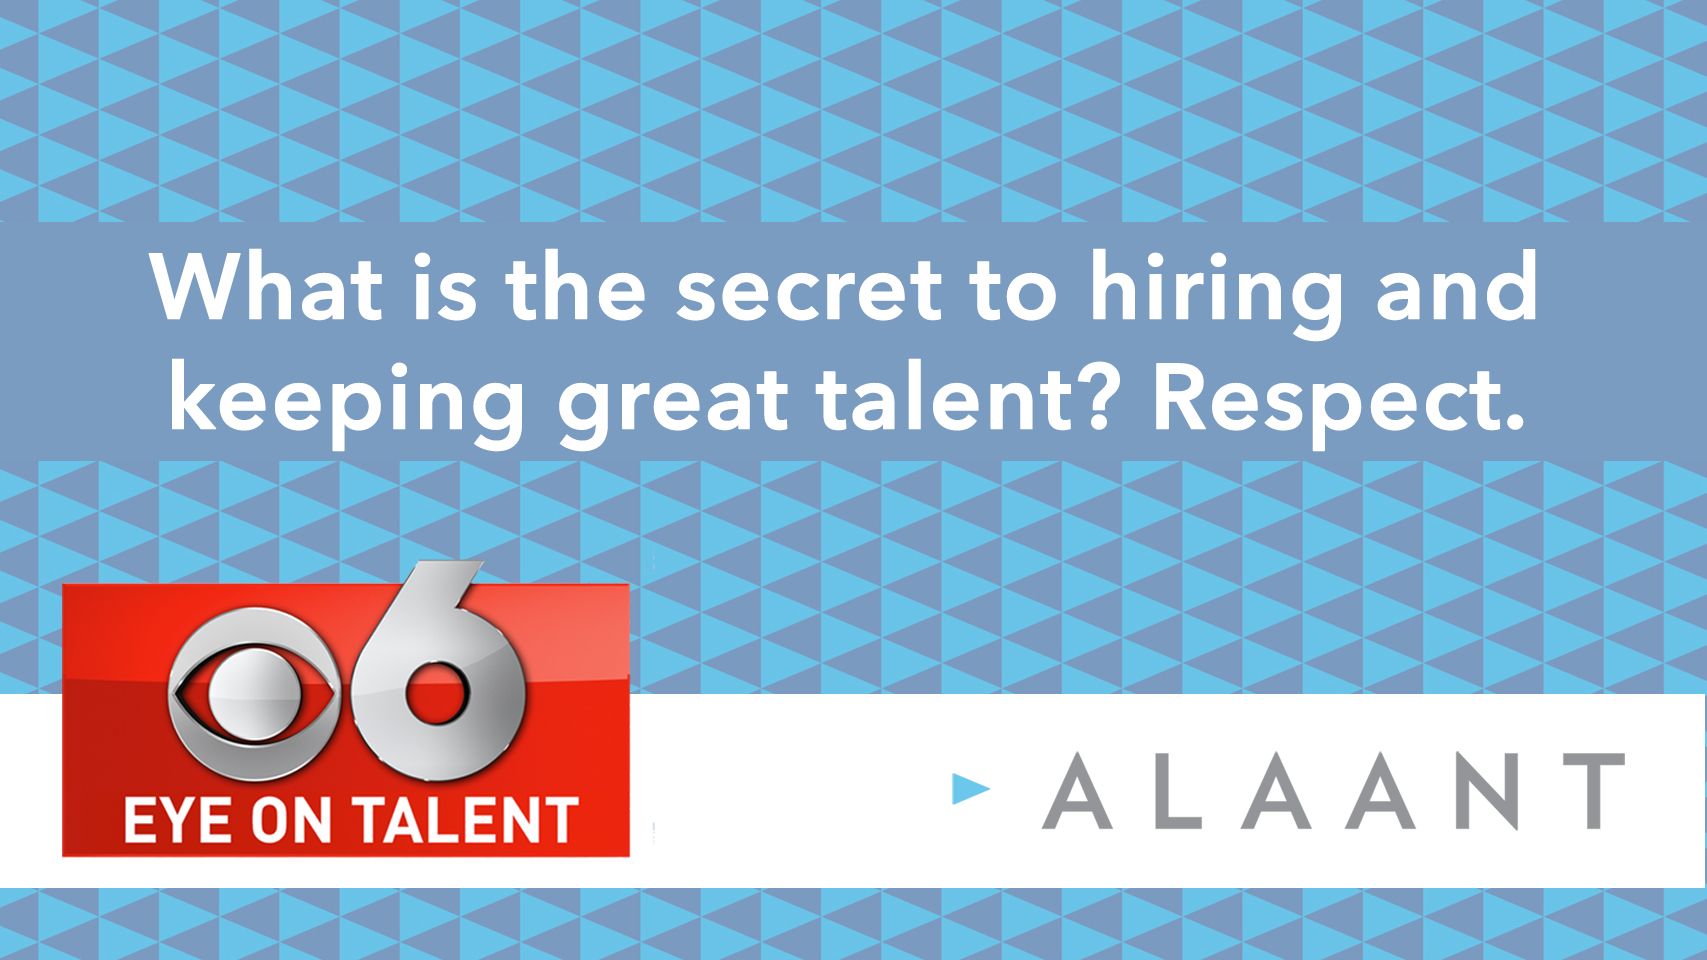 Eye on Talent: What is the secret to hiring and keeping great talent? Respect.